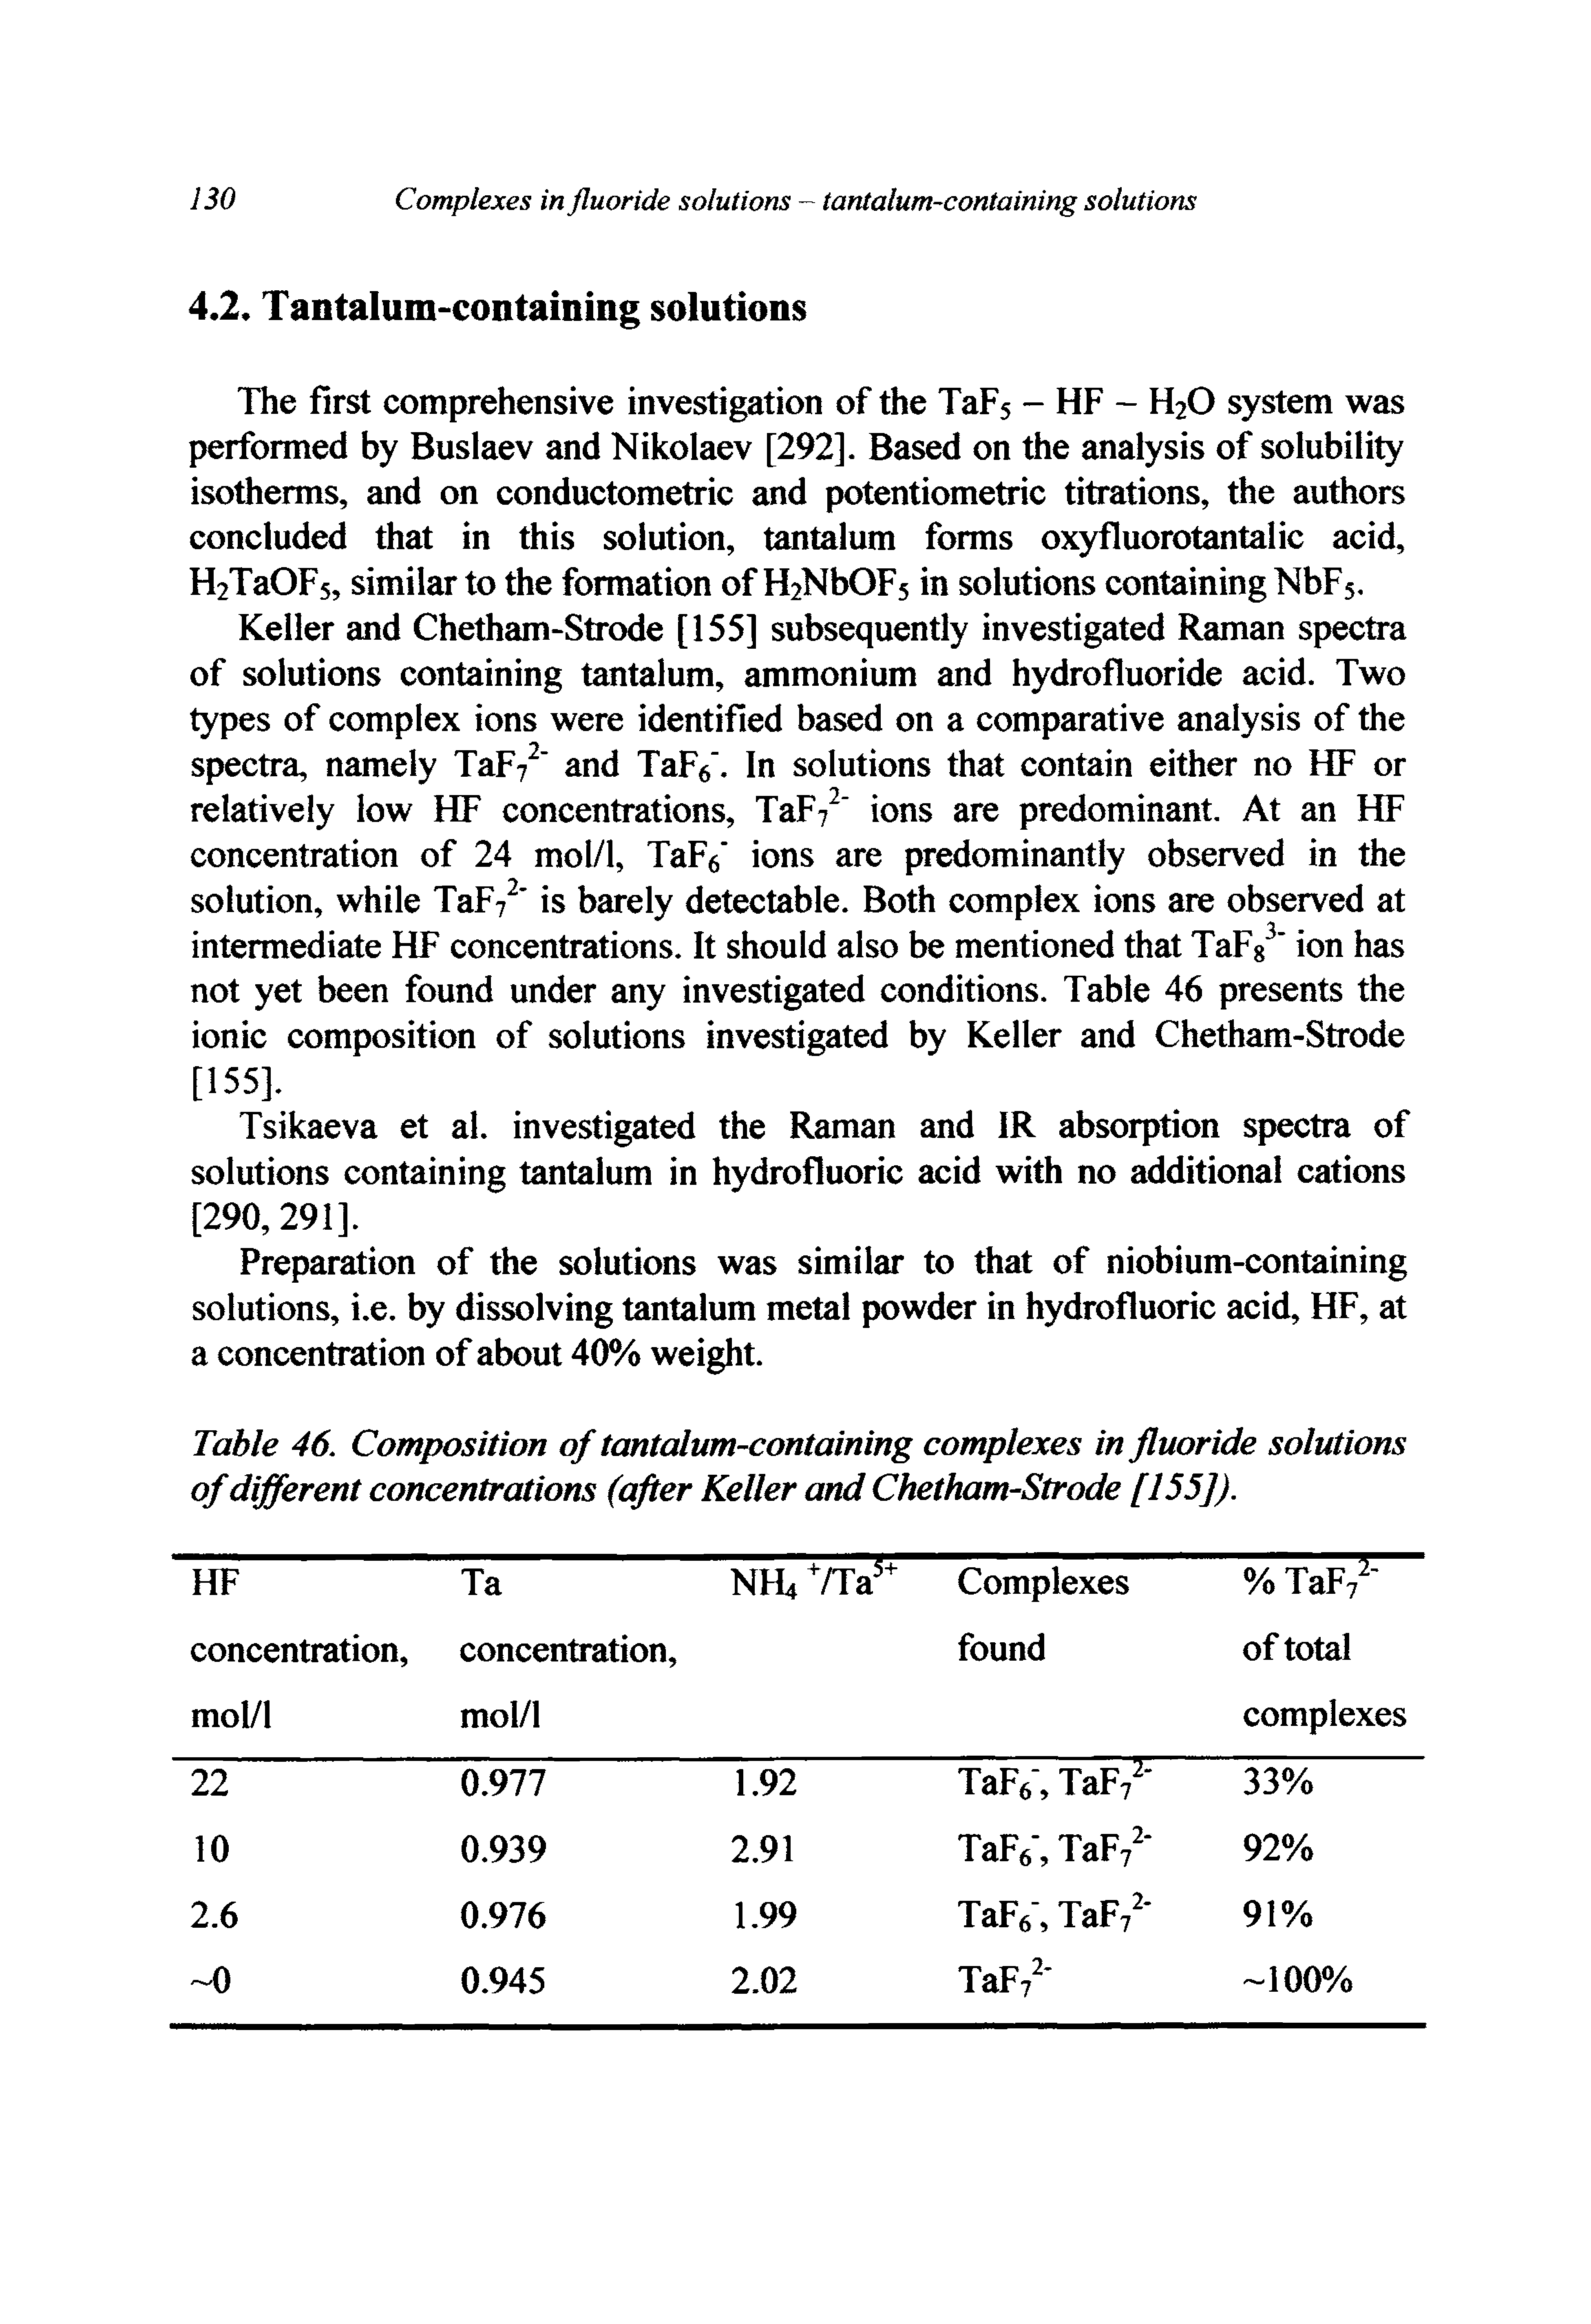 Table 46. Composition of tantalum-containing complexes in fluoride solutions of different concentrations (after Keller and Chetham-Strode [155]).